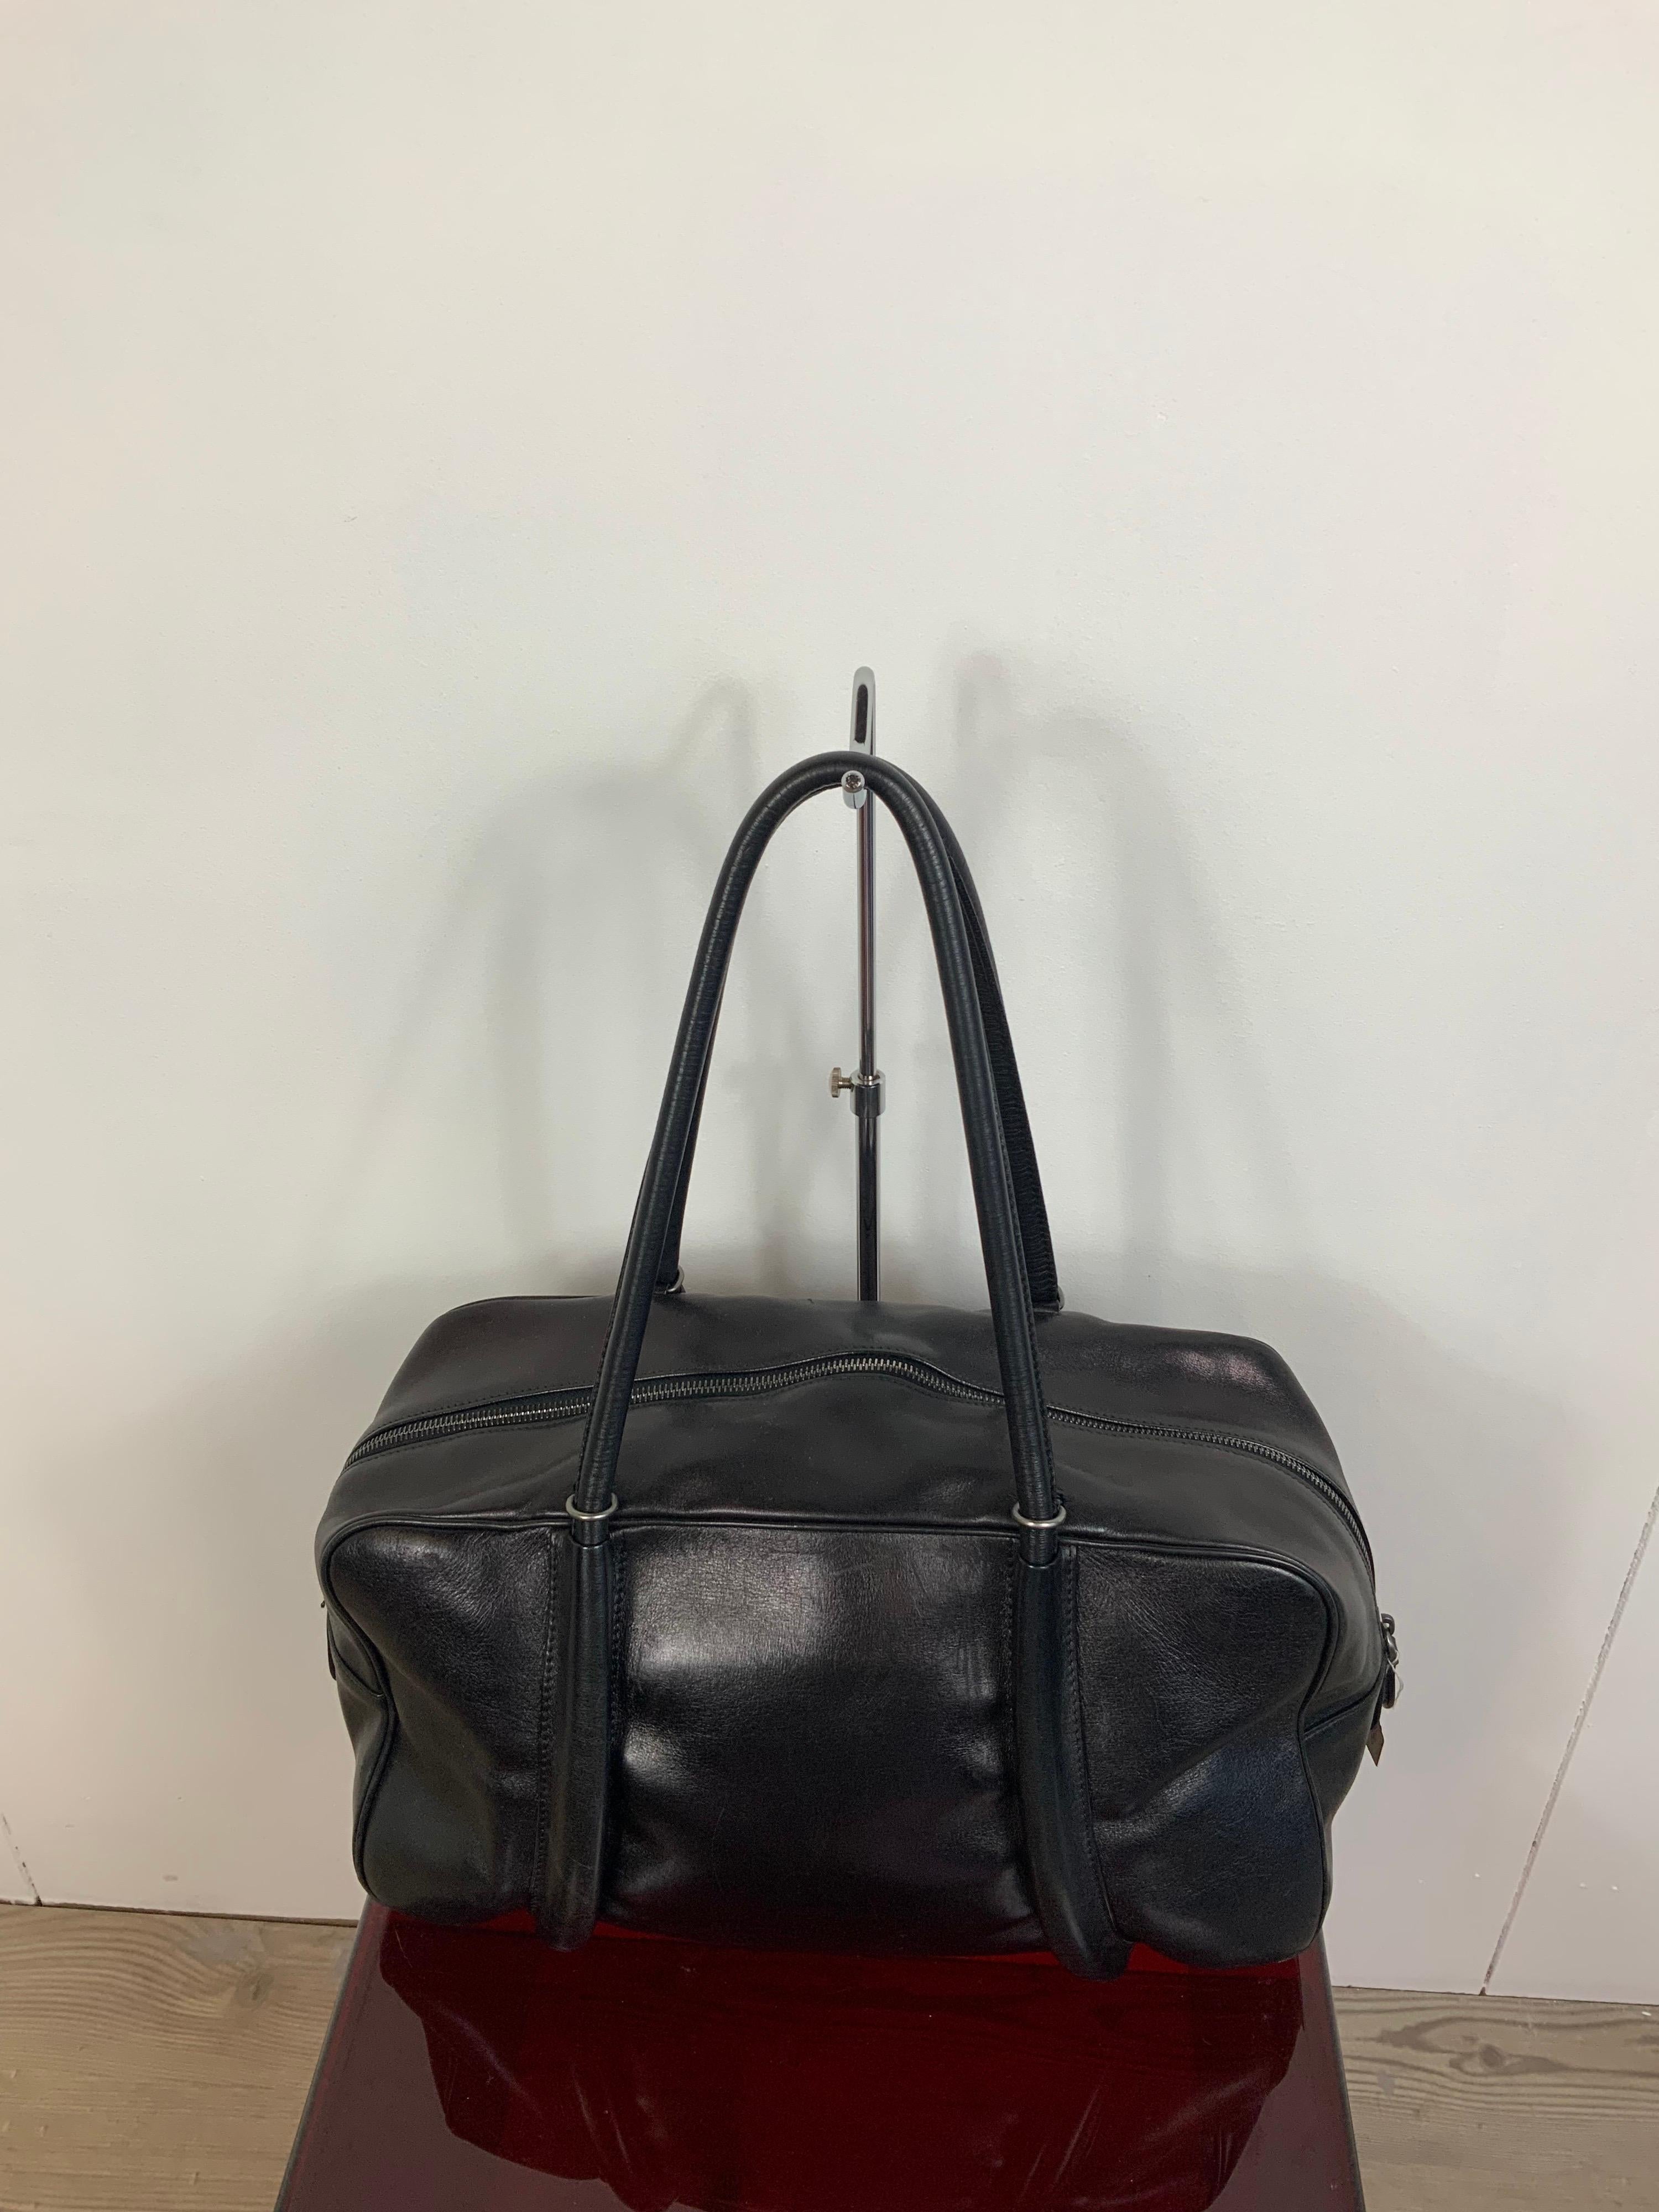 Alaia Paris bag.
Leather black leather. Pink interior. Silver hardware.
Zip closure. Inside of the bag you can find a small mirror as accessory.
Bag corners show some use of sign. 
Measurements:
height 21 cm
width 39 cm
depth 14 cm
handle 27